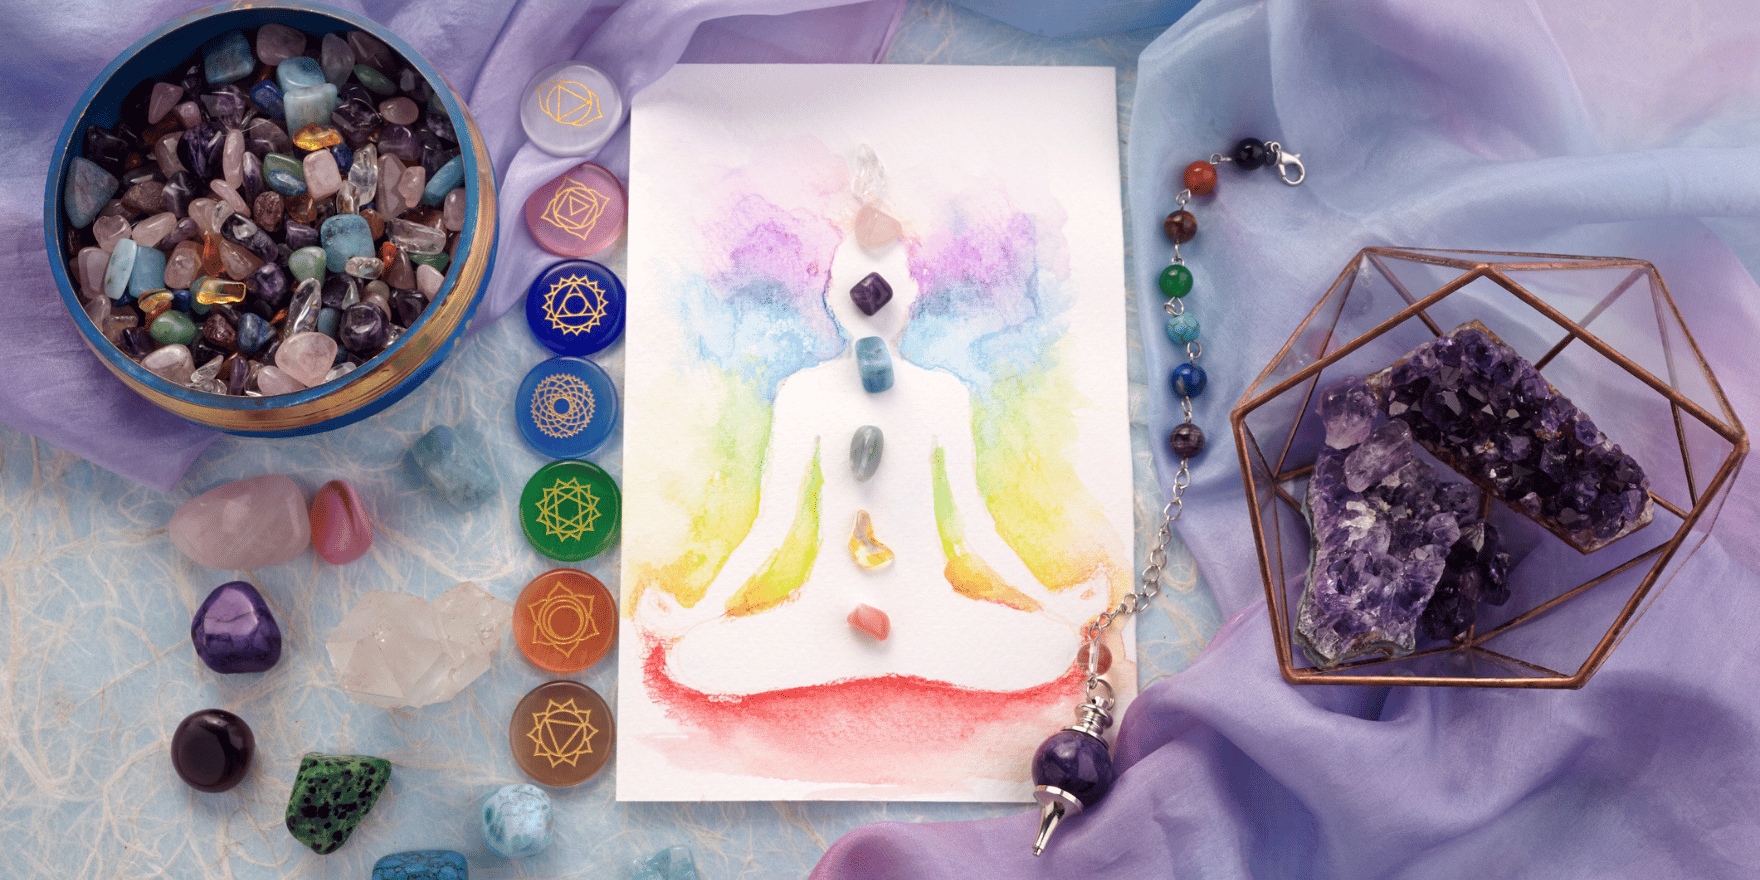 A chakra diagram with chakra stones and crystals